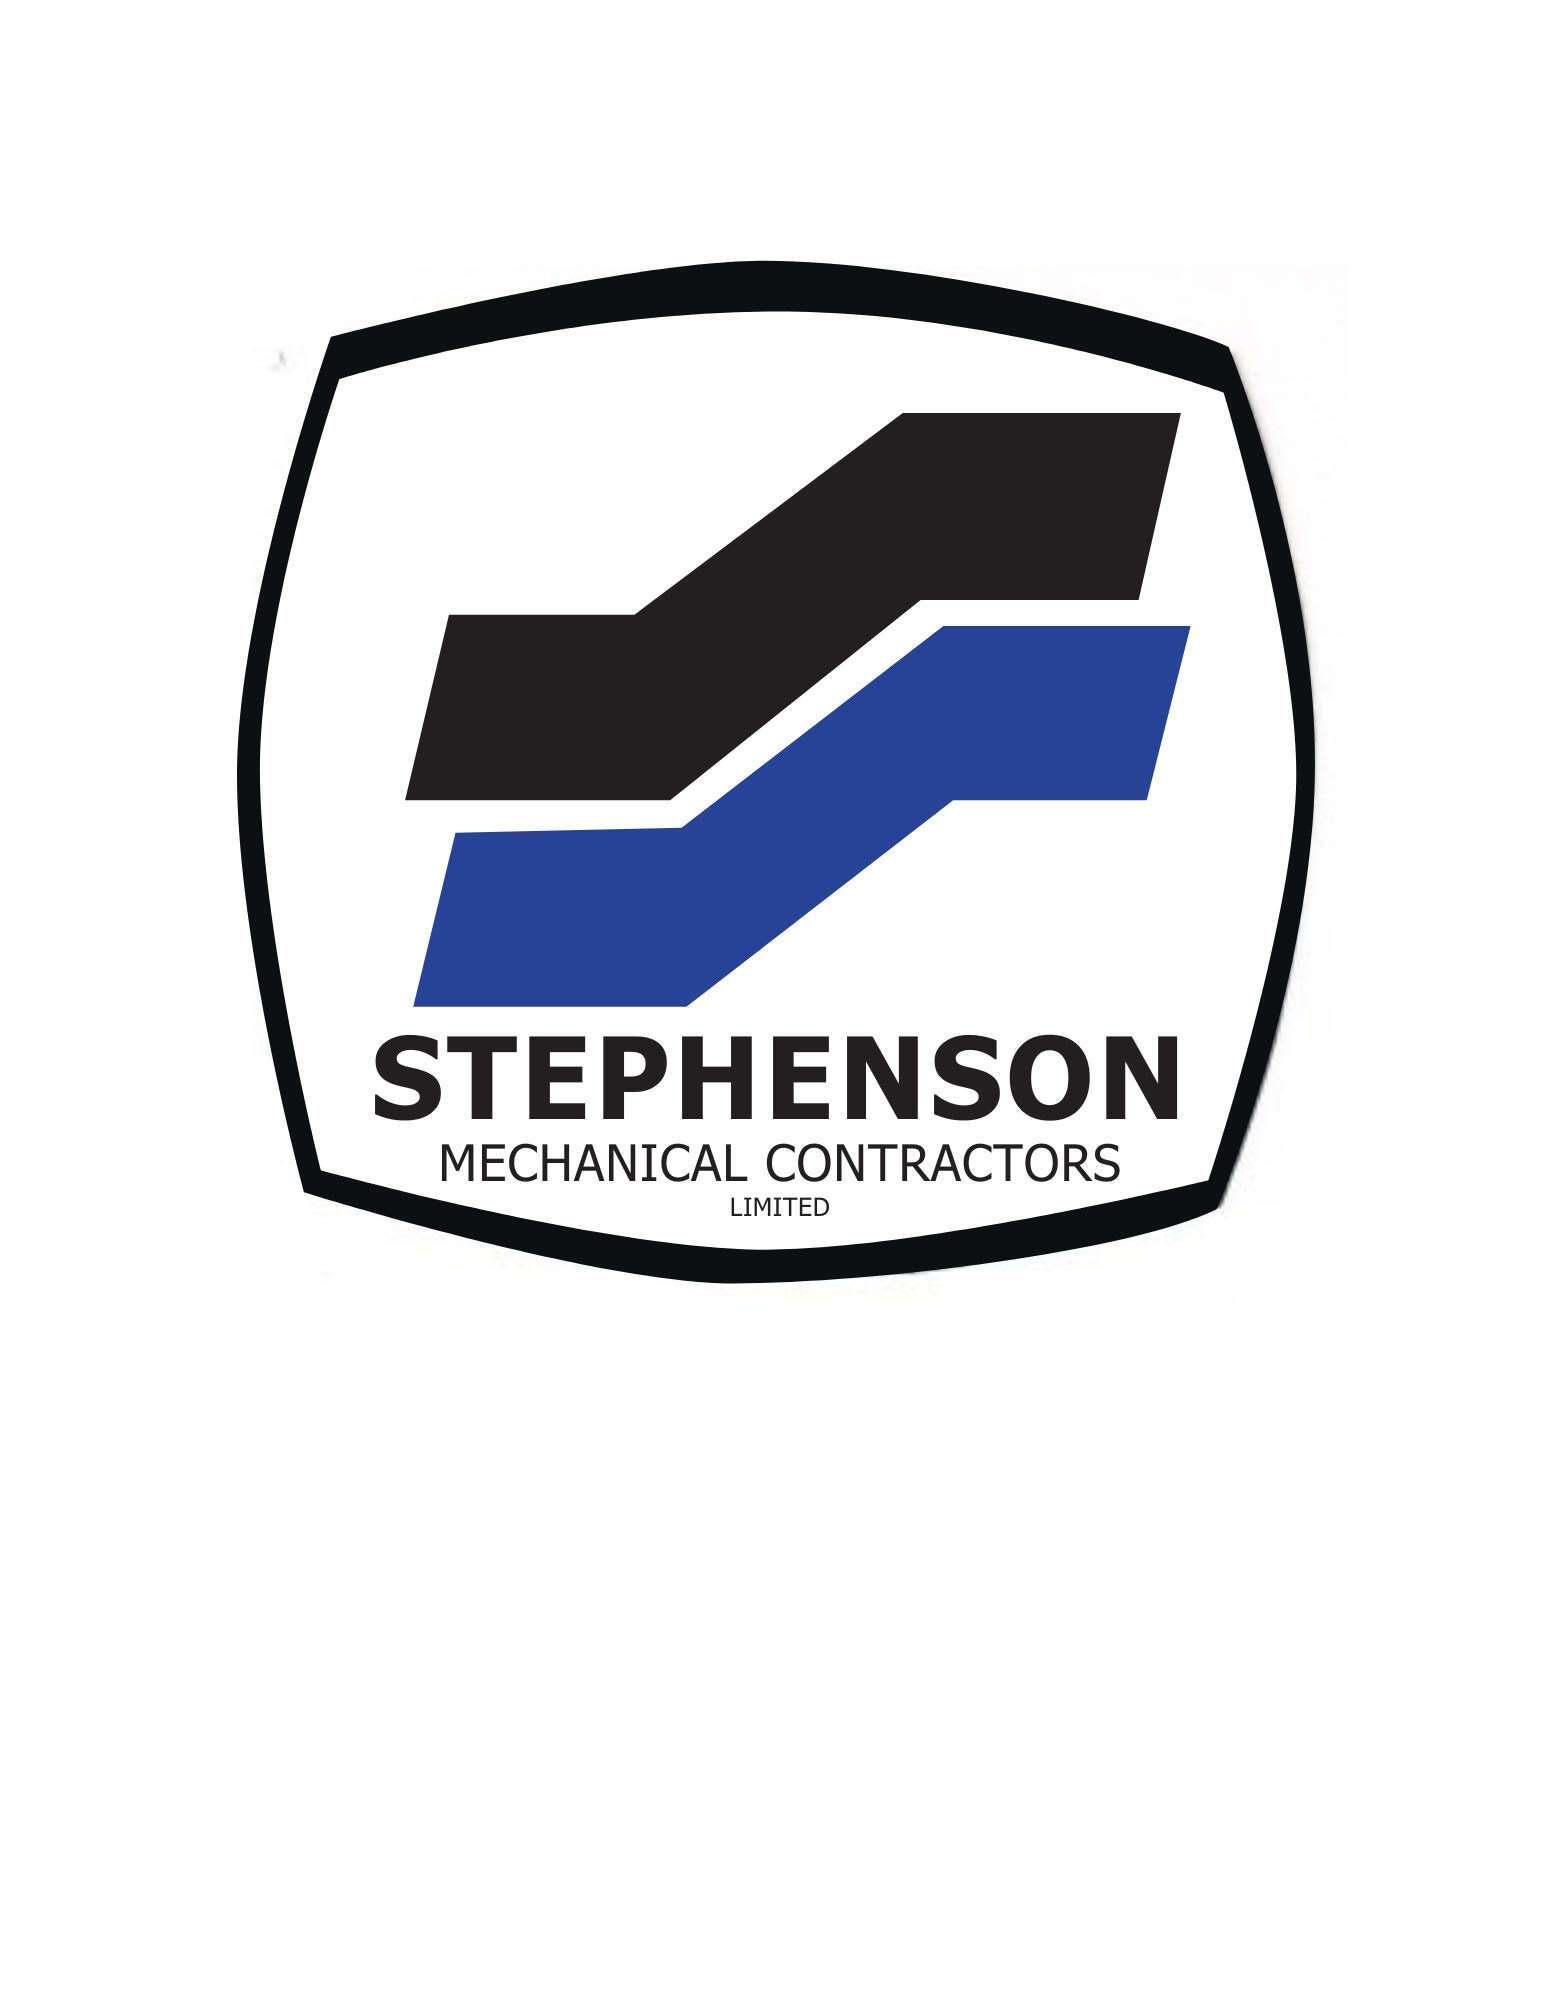 Stephenson Mechanical Contractors Limited